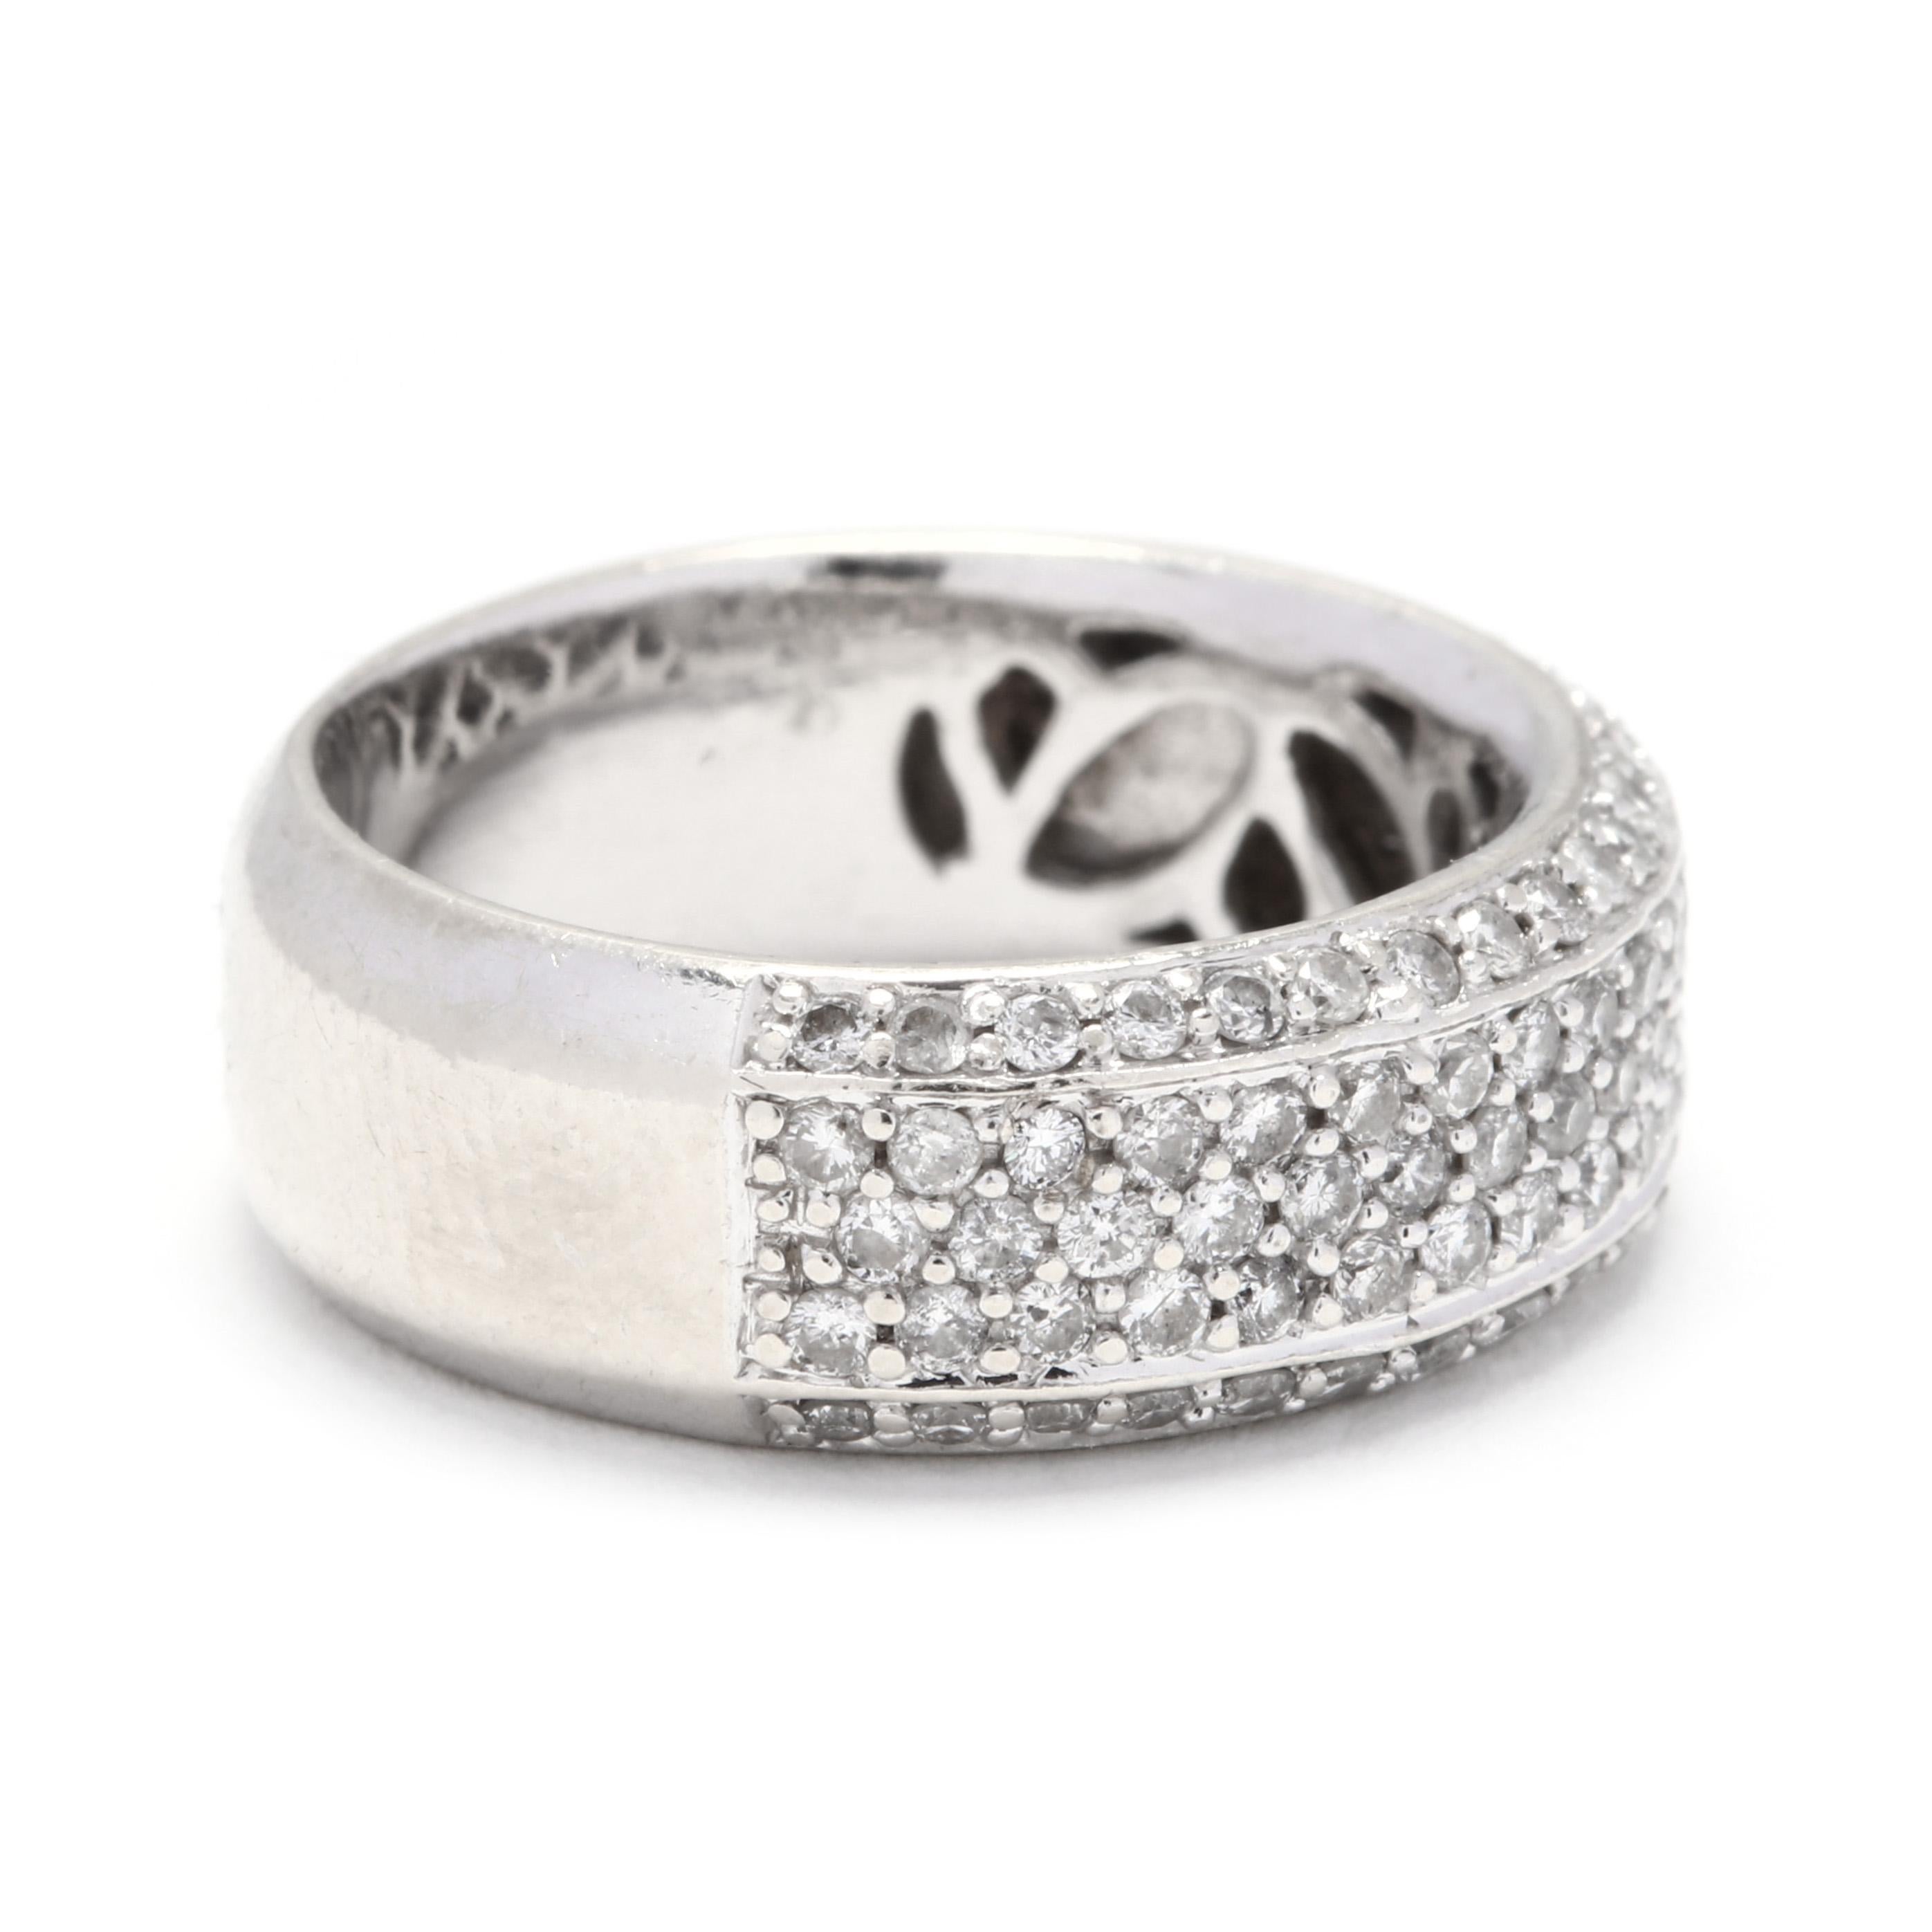 A 14 karat white gold and pavé diamond band ring. A wide band ring with beveled edges, with pavé set full cut round diamonds weighing approximately 1 total carats. A classic fashion statement or anniversary band!

Stones:
- diamonds, 94 stones
-